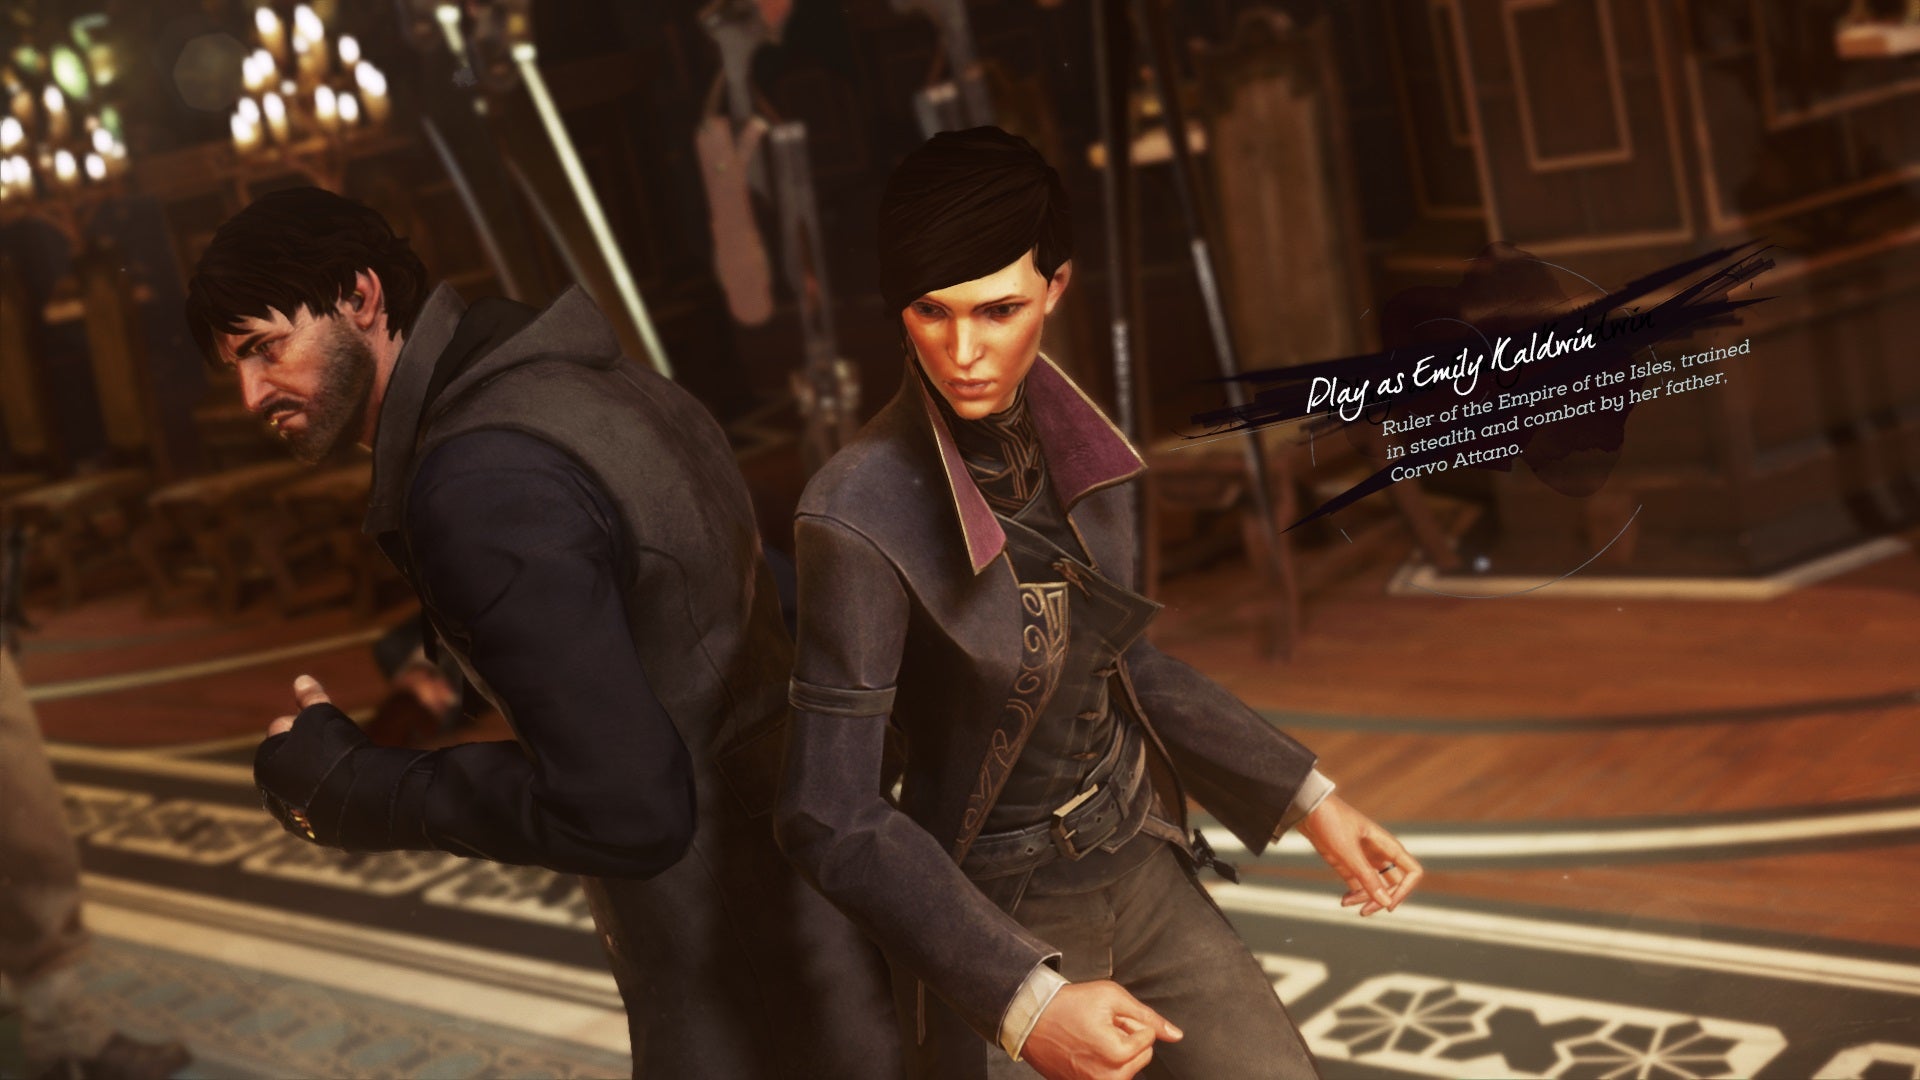 Erobre scarp Forøge Dishonored 2 PS4 Review: The Honor Remains Untouched | VG247